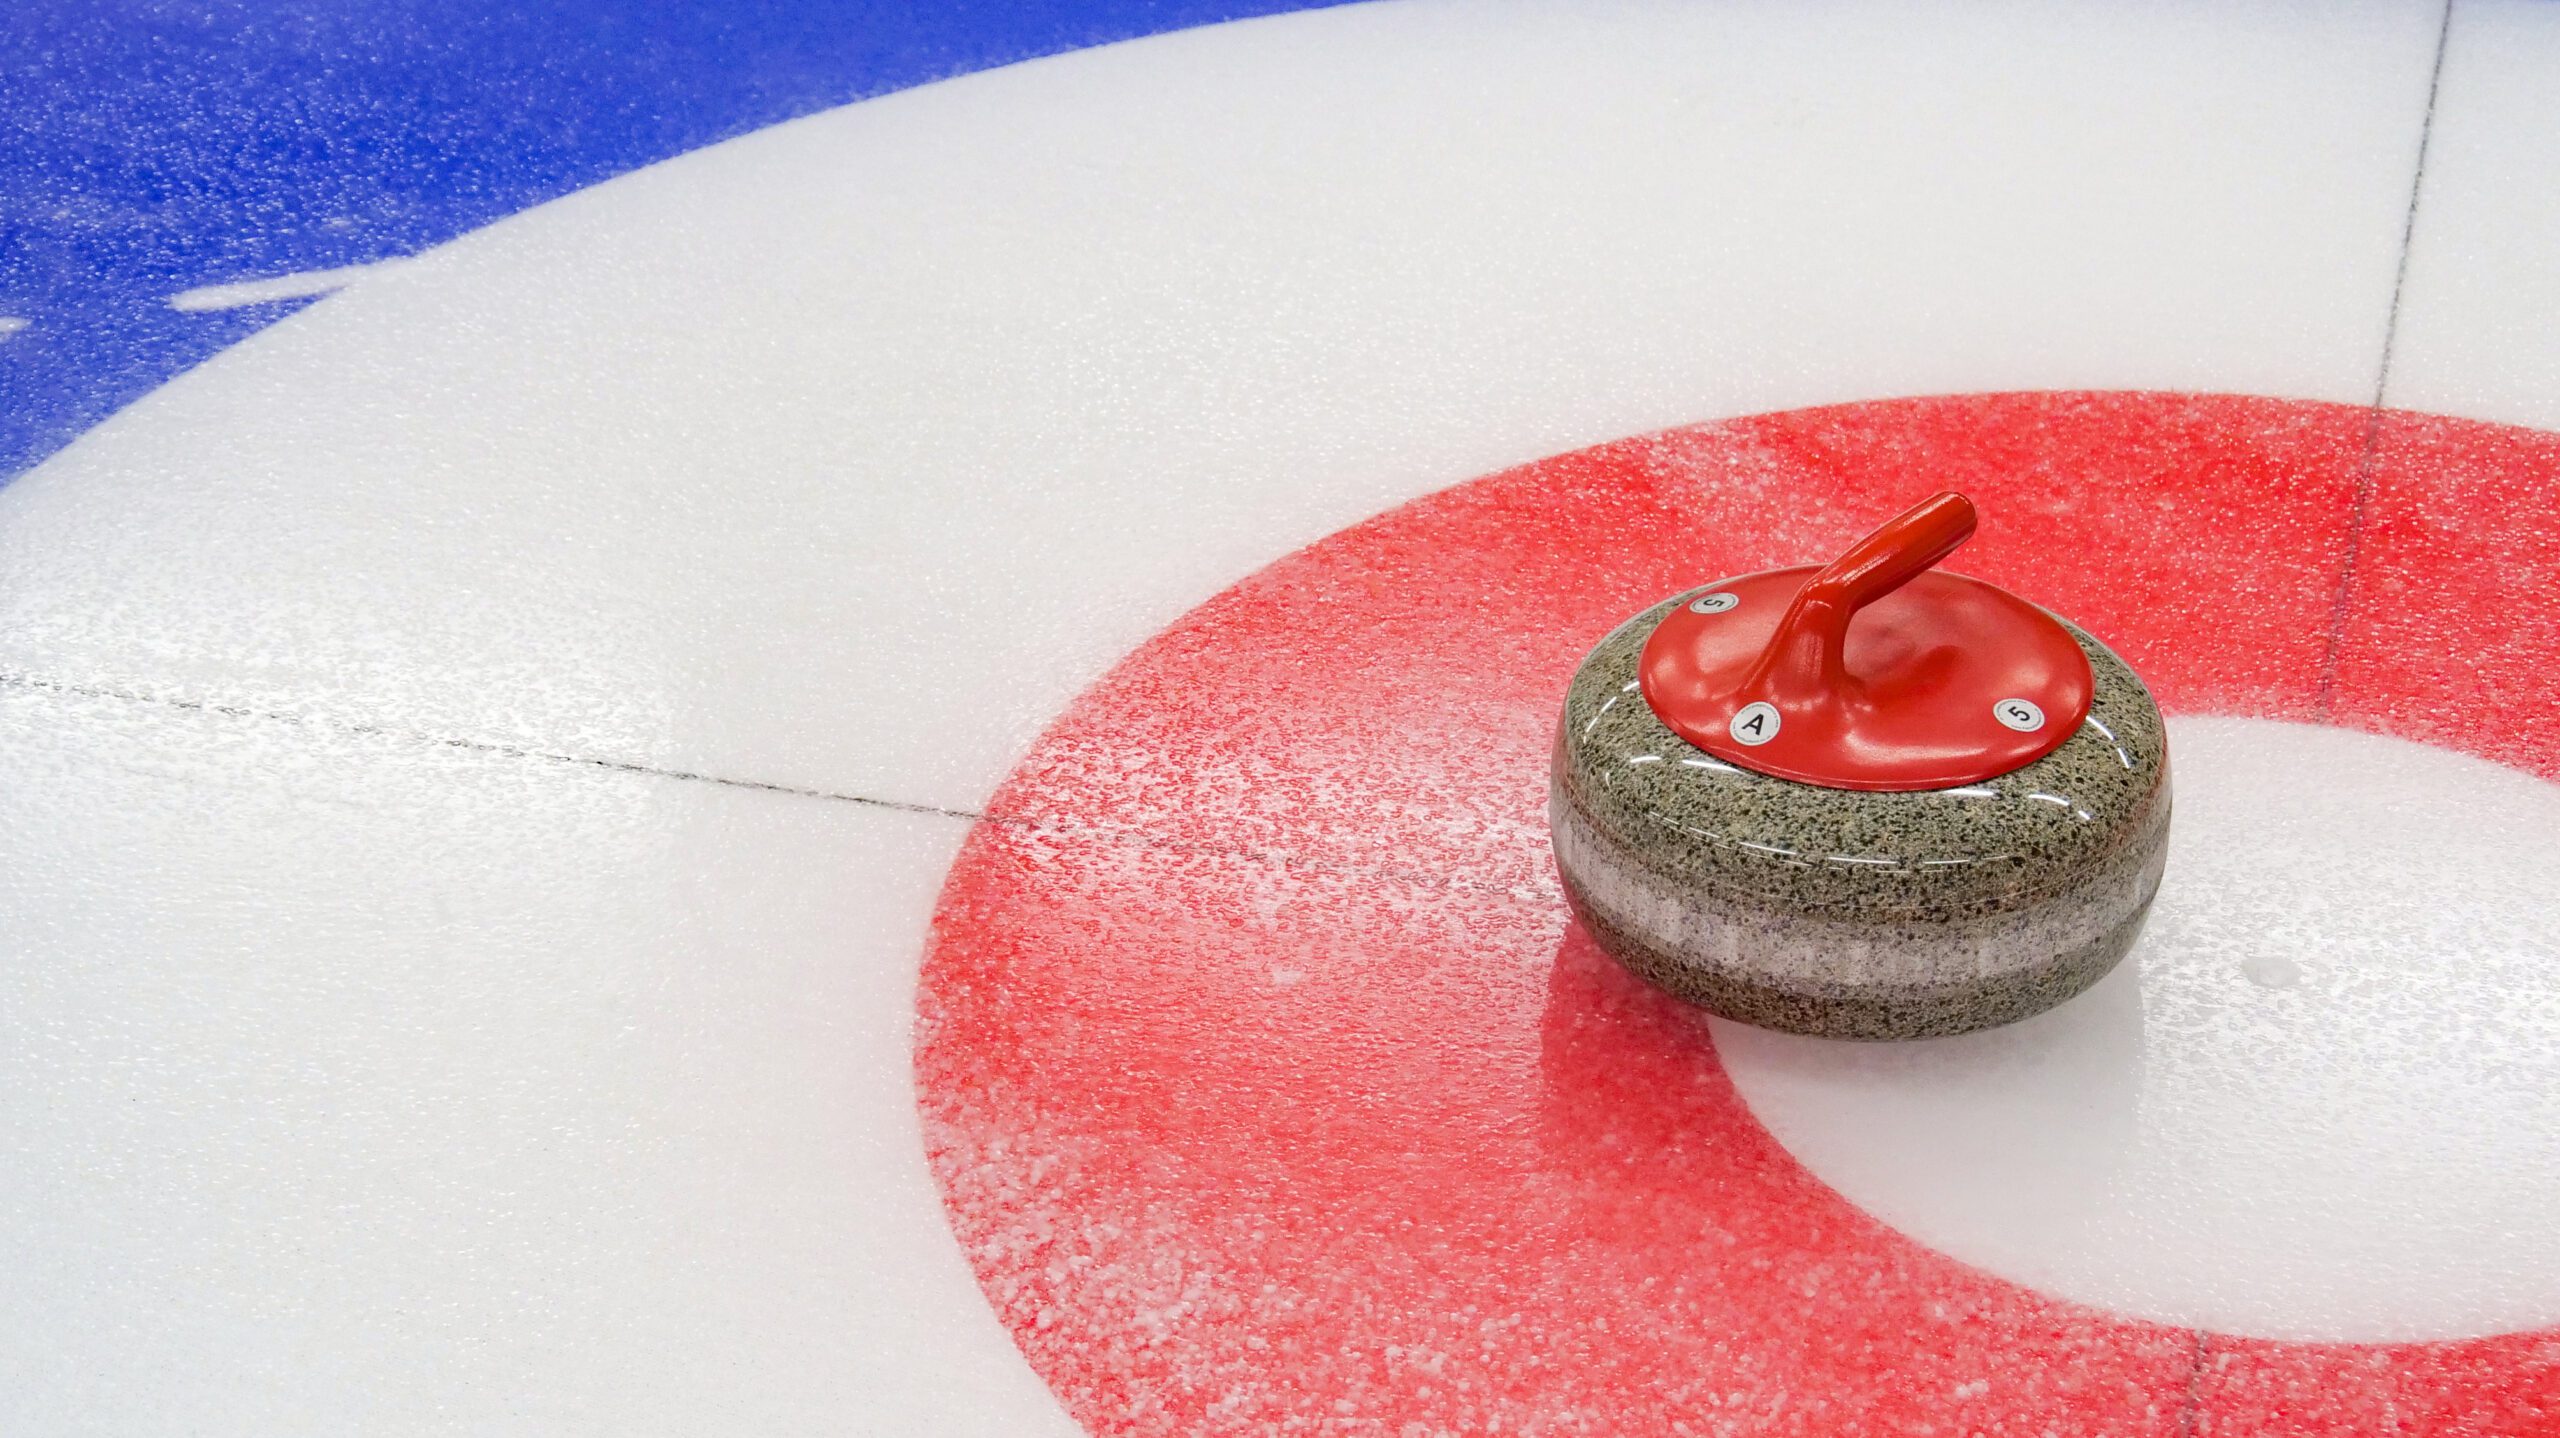 Close up of a curling target, with a curling stone in the centre